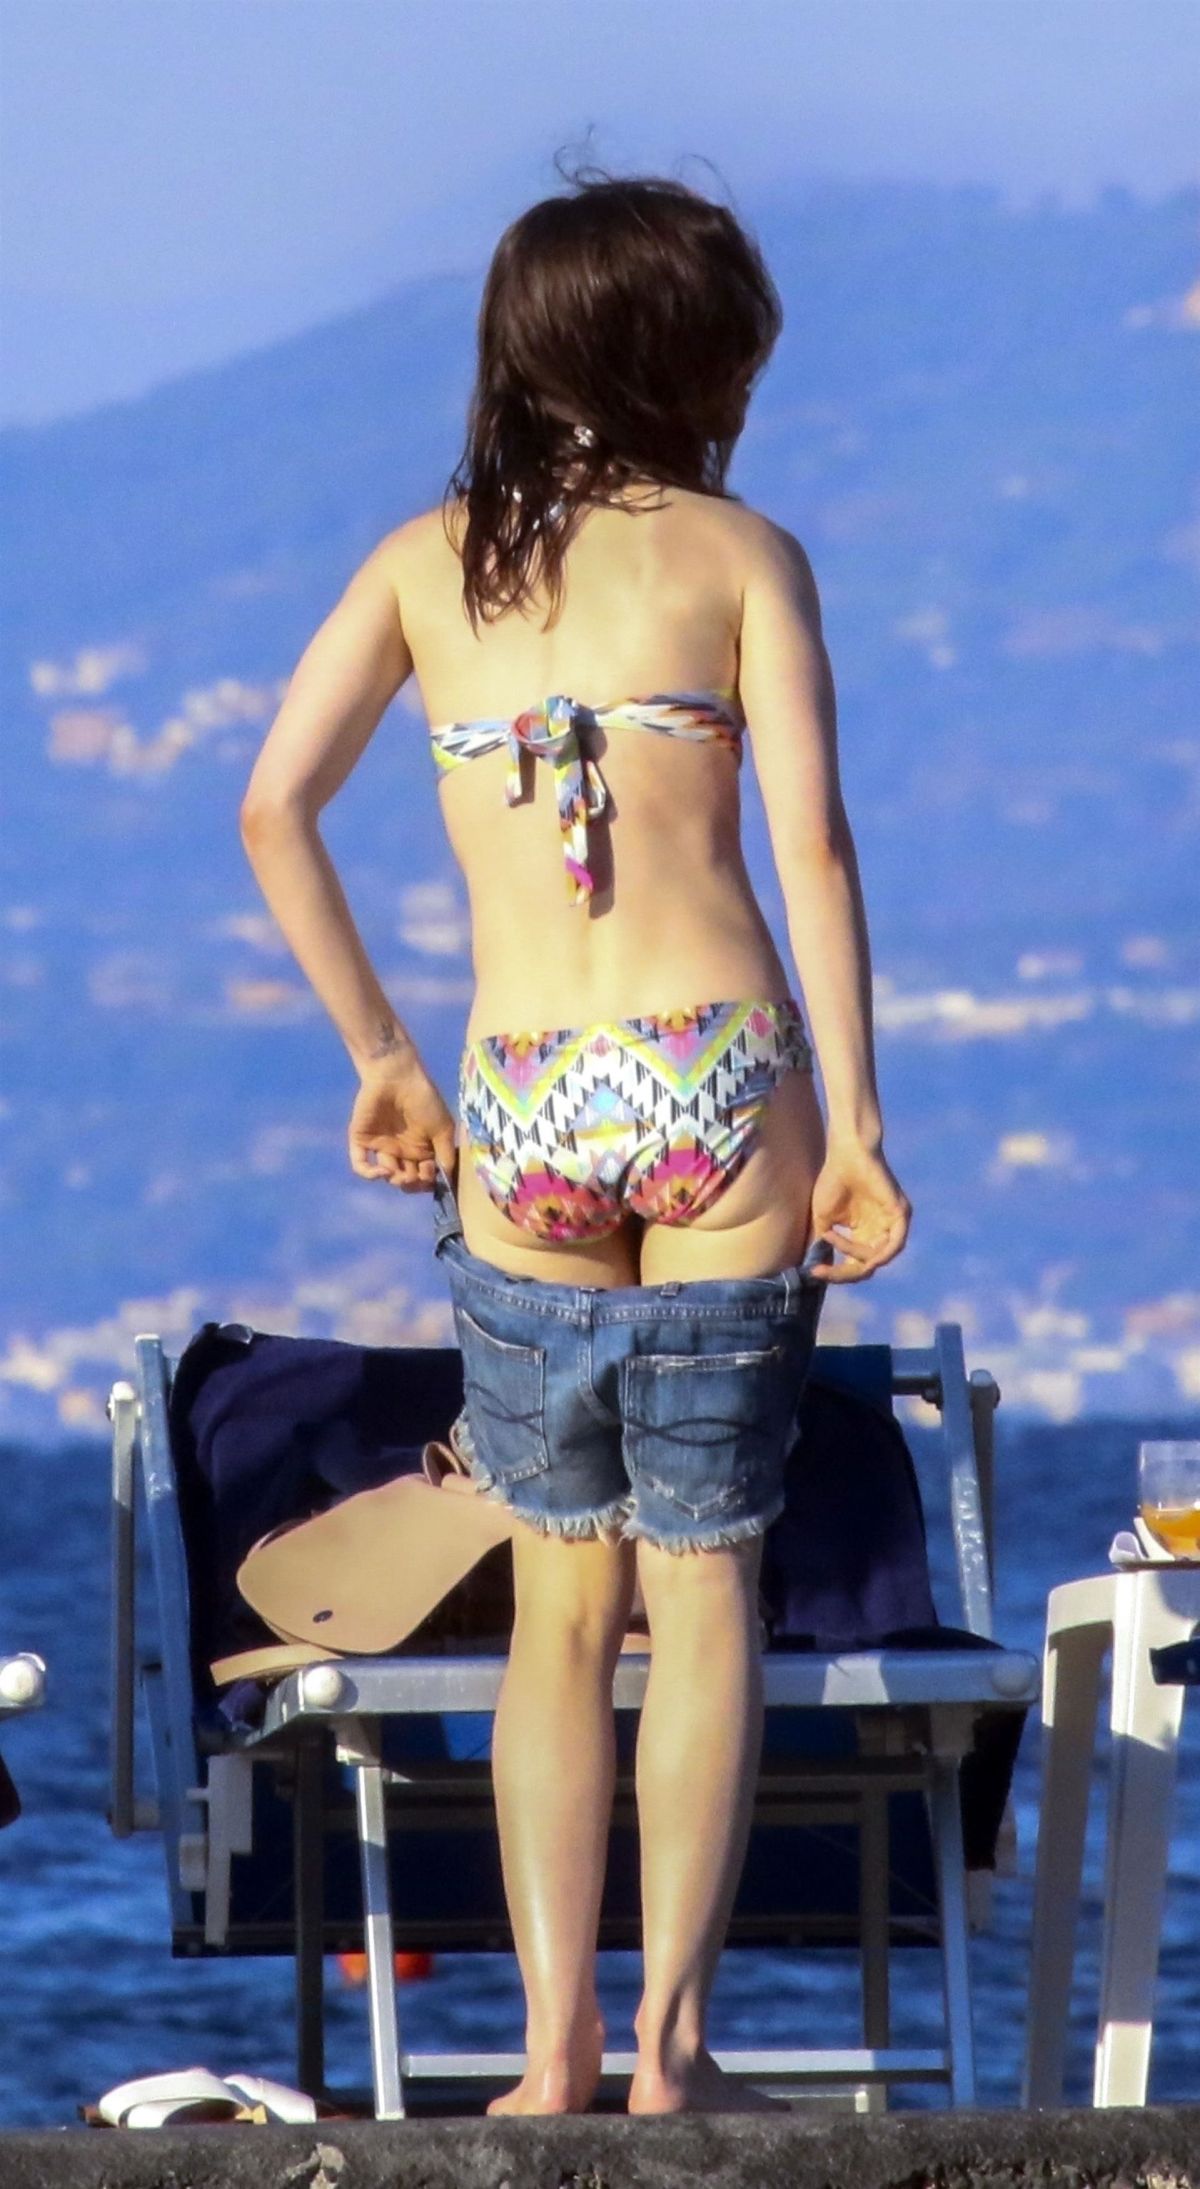 cynthia bushman recommends lily collins ass pic